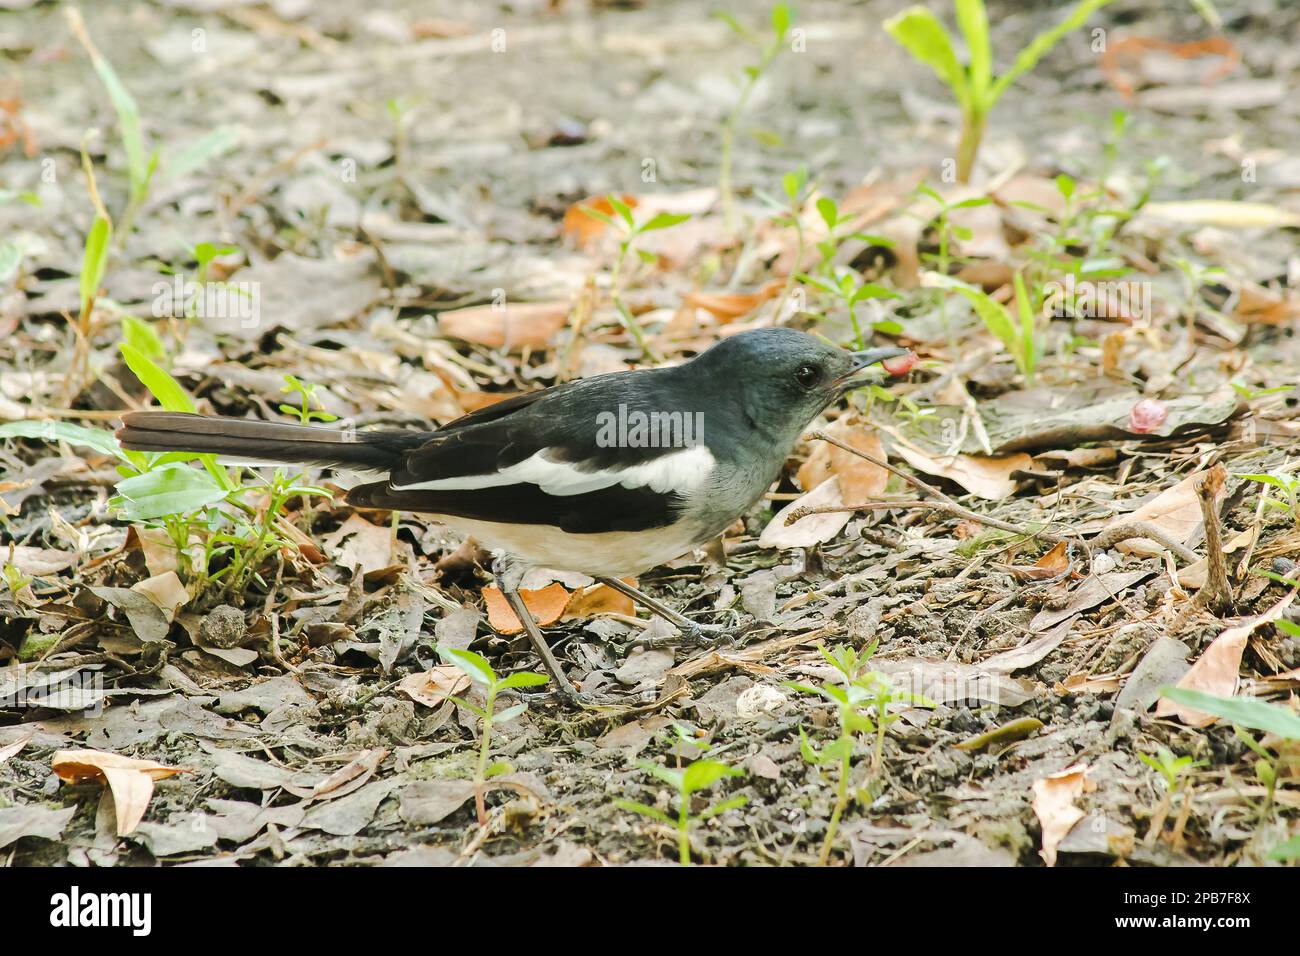 Oriental magpie robin is on the ground, Oriental magpie robin is a small black bird. Oriental magpie robin is a small insectivorous bird. Stock Photo